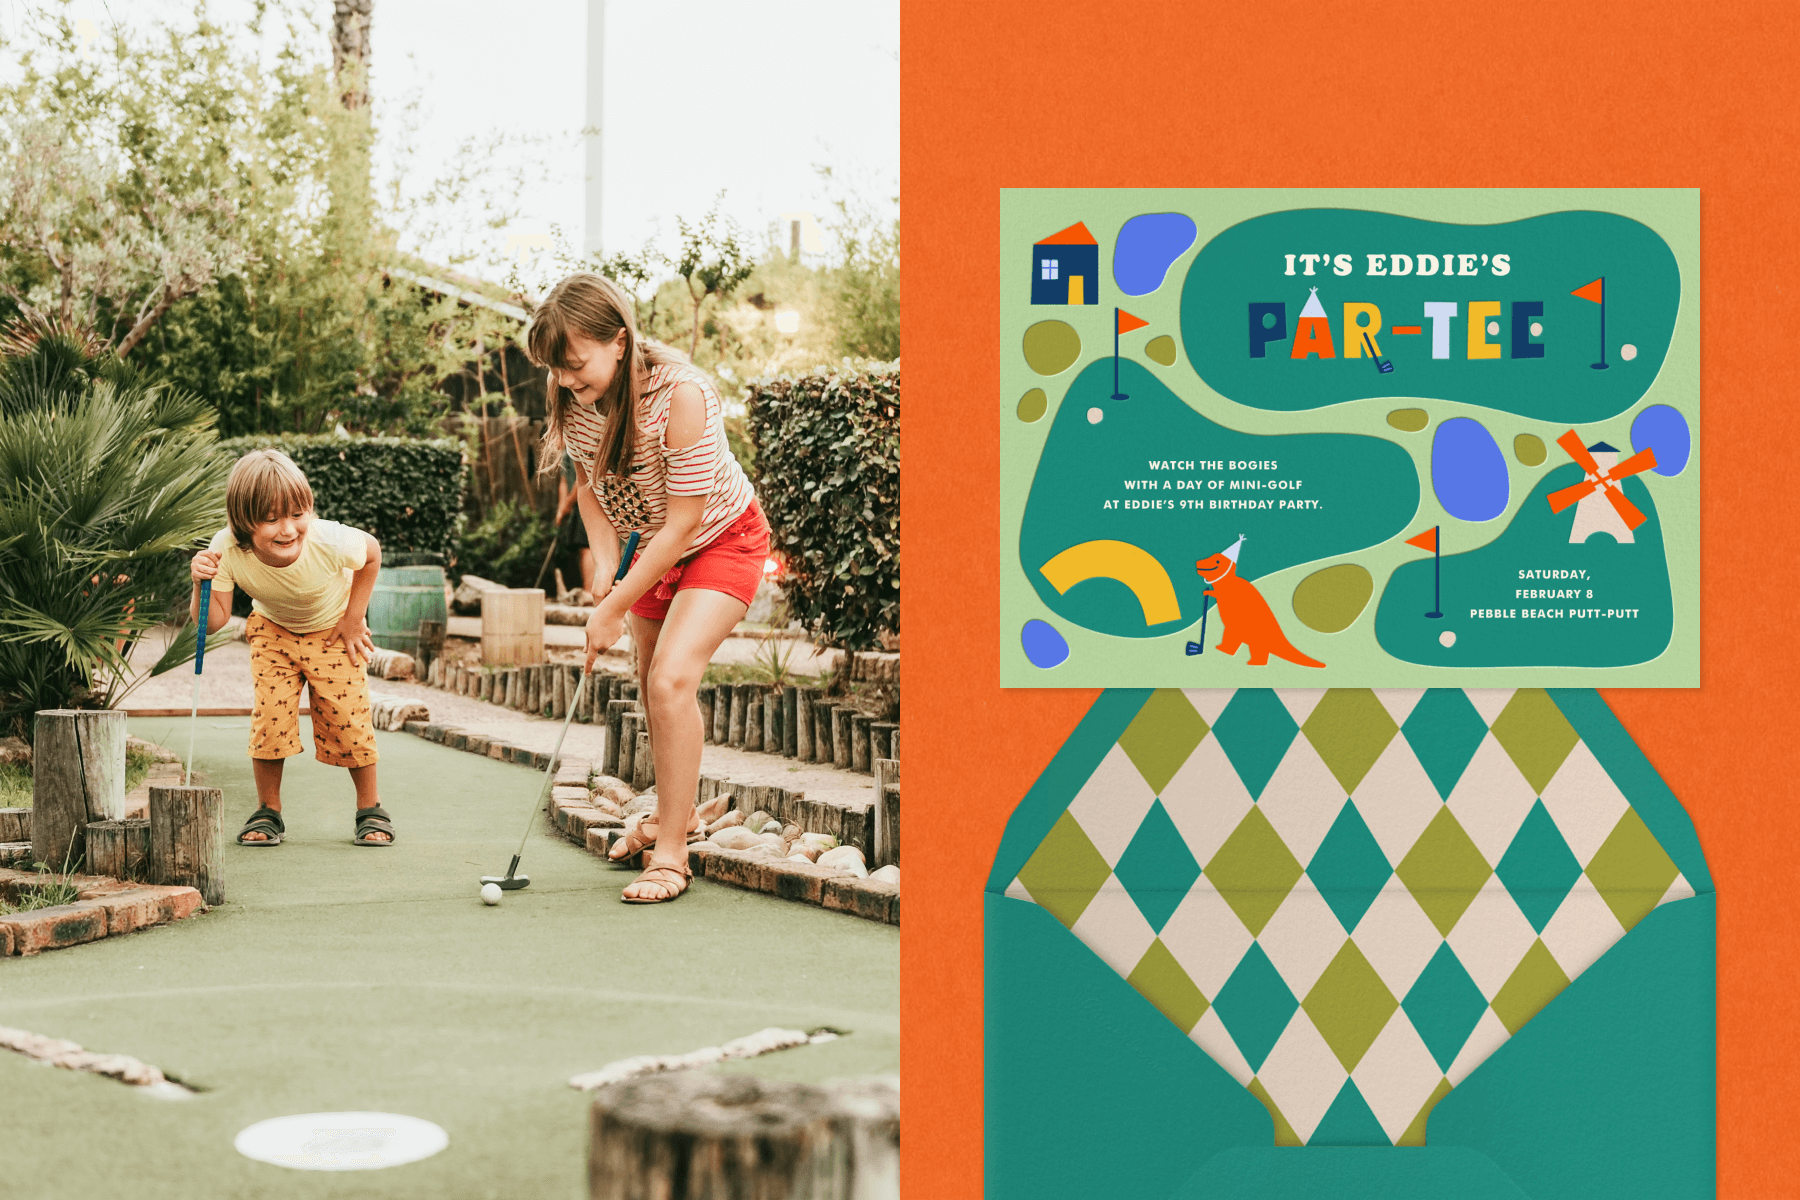 A young boy and girl play miniature golf; an invitation for a ‘par-tee’ resembles a mini golf course.